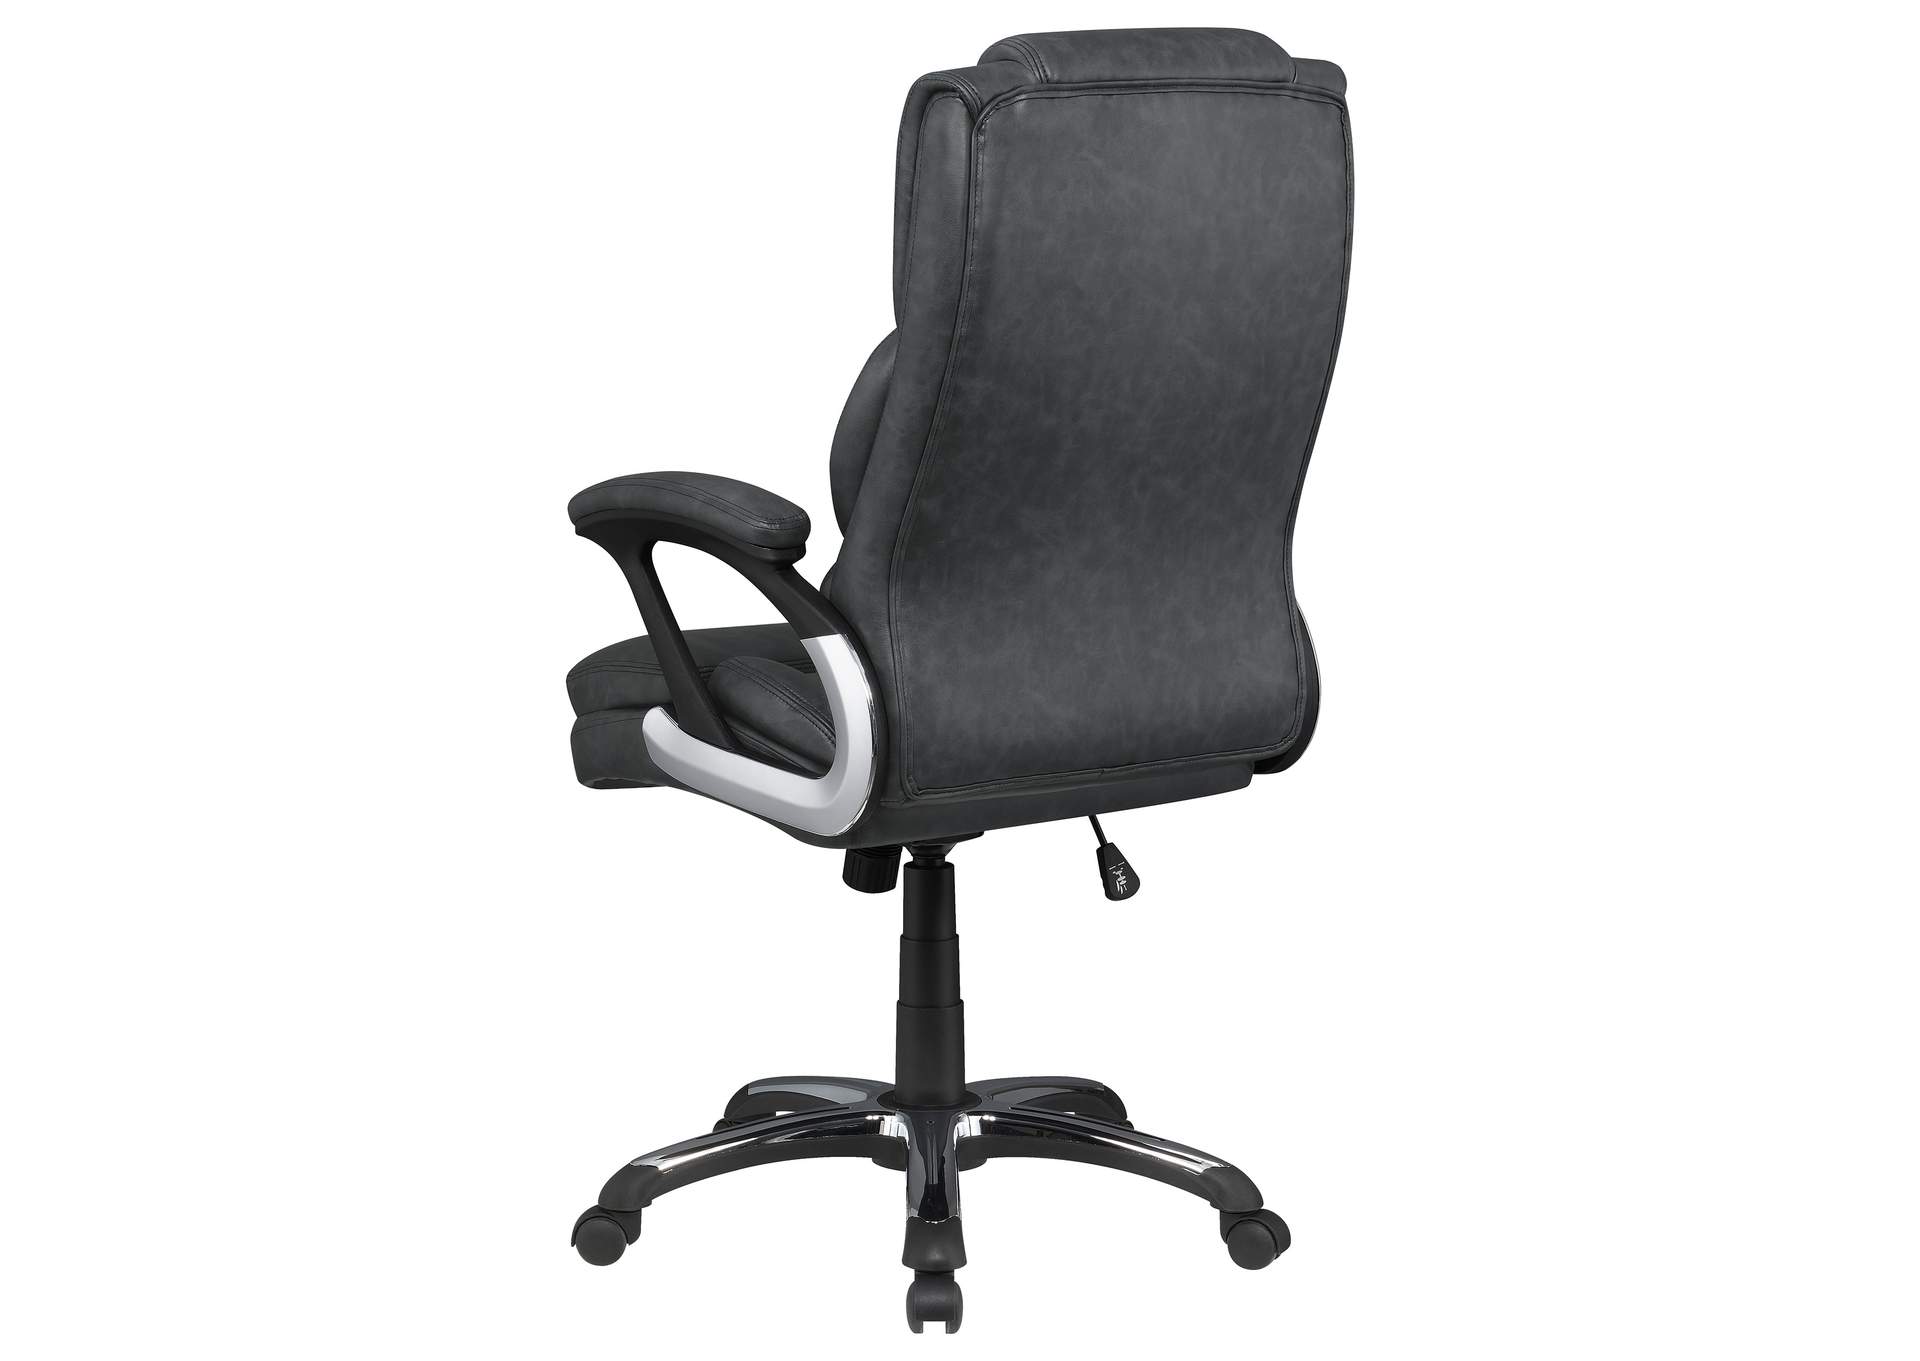 Nerris Adjustable Height Office Chair with Padded Arm Grey and Black,Coaster Furniture